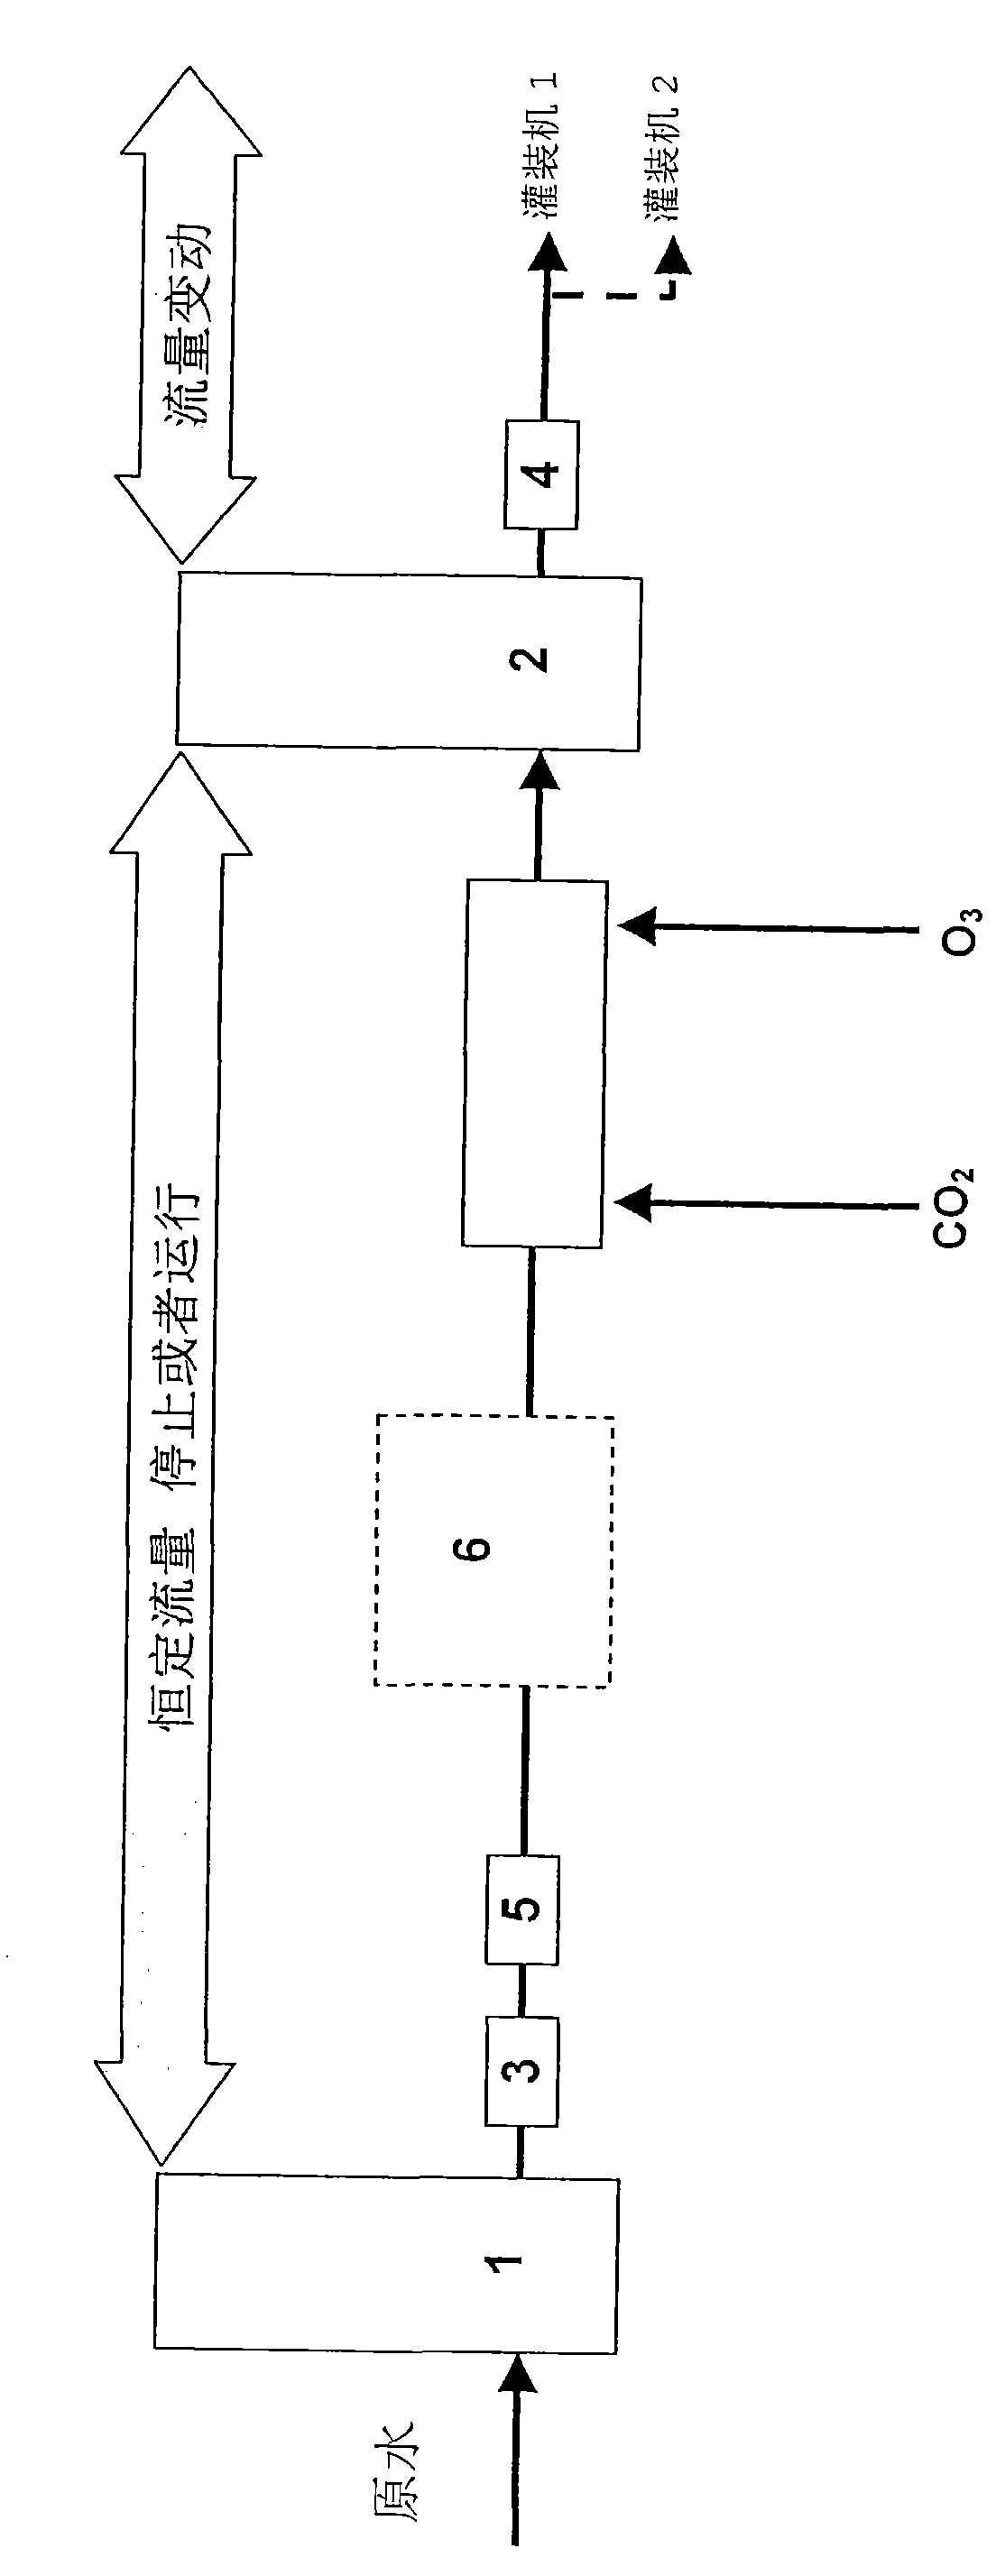 Process for producing bottled water sterilized by ozone and sterilized bottled water